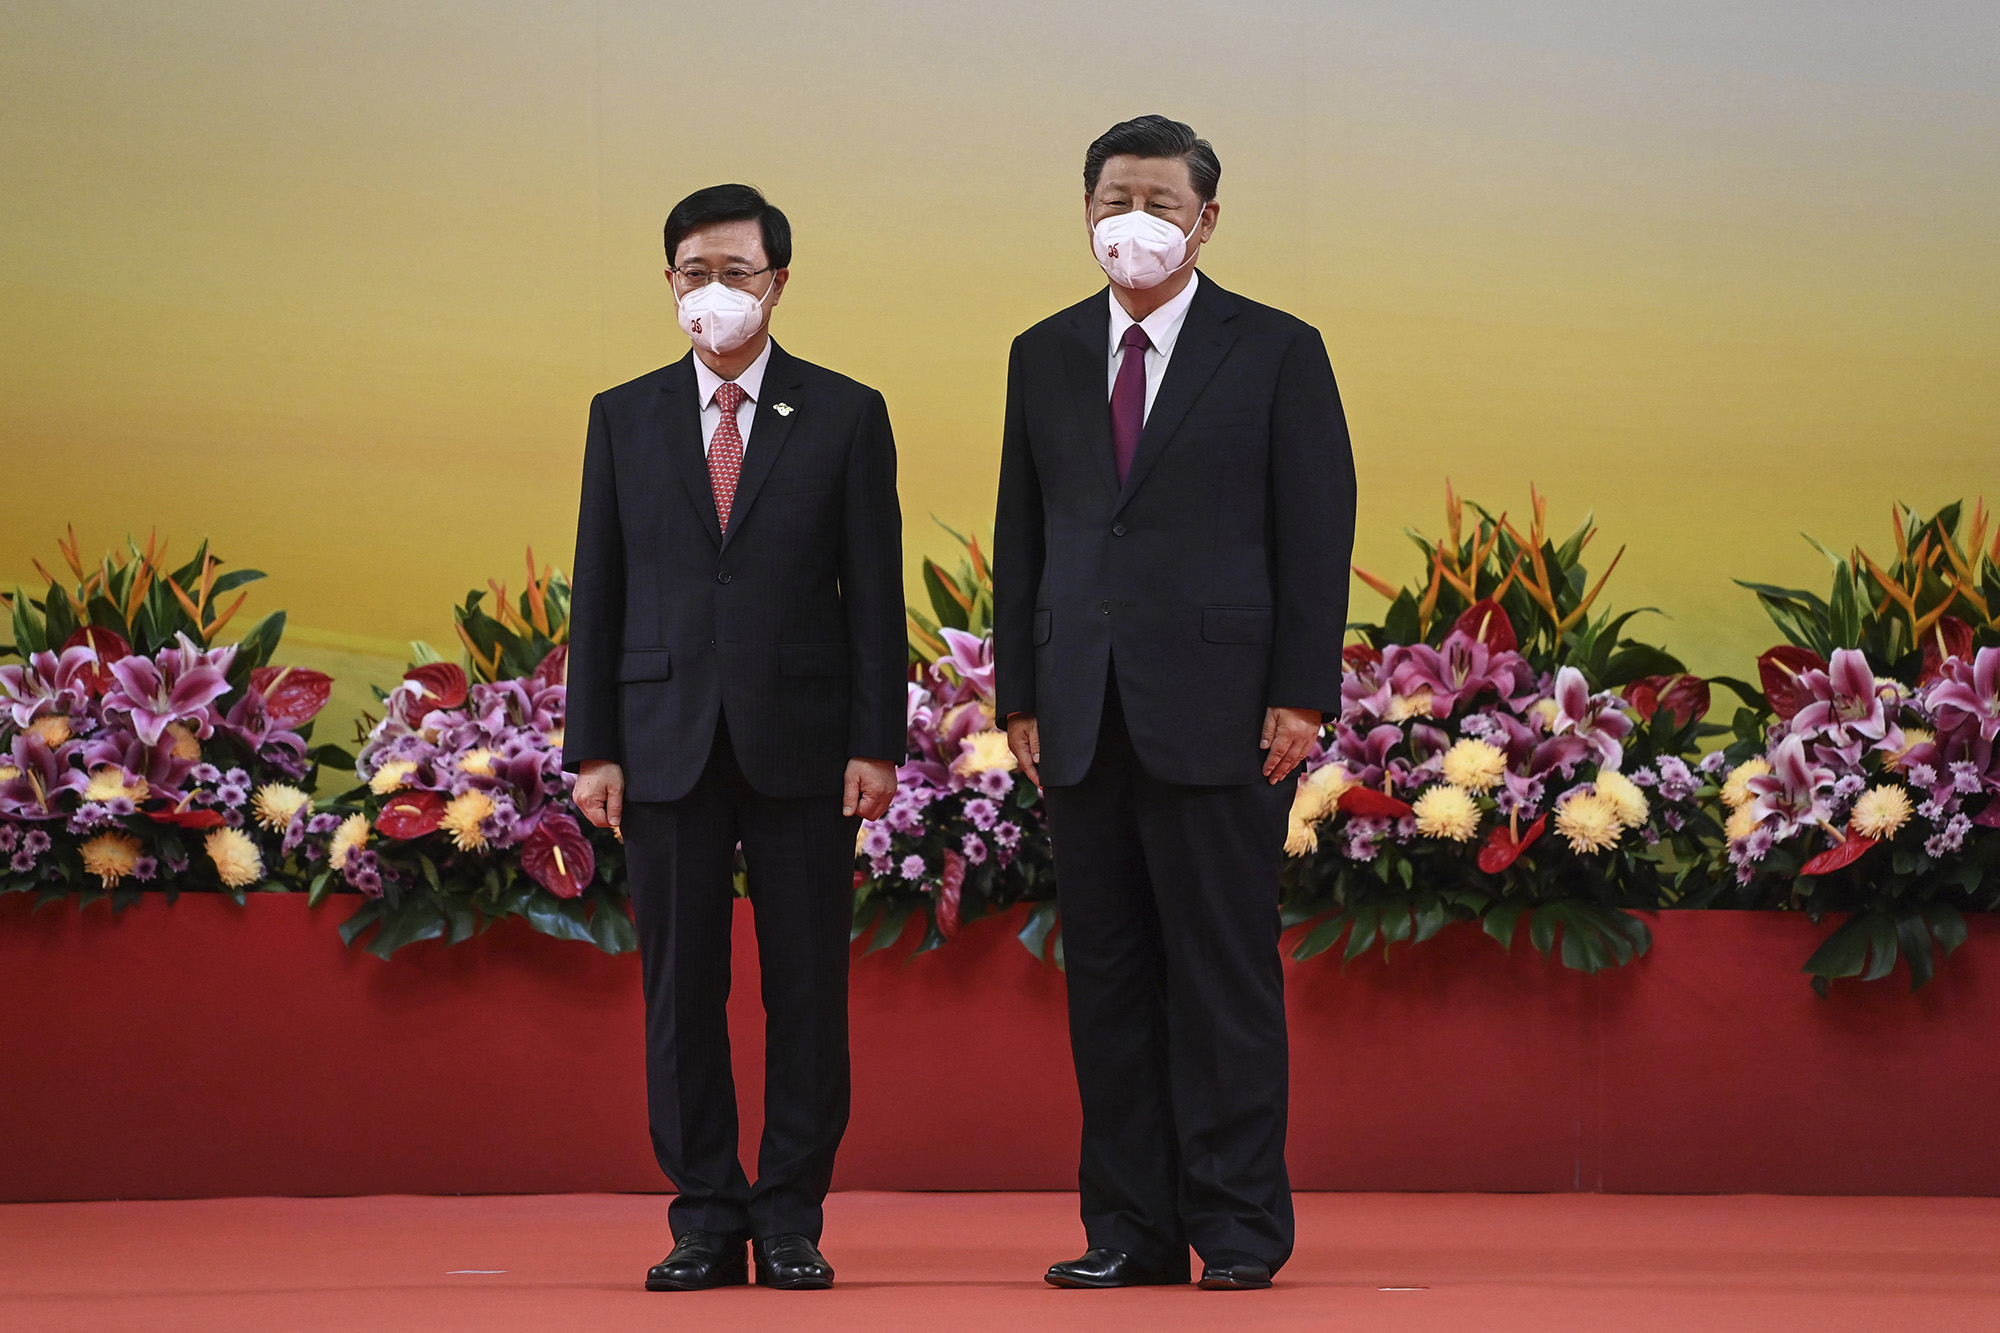 21) N-95s and no handshakes: Xi is taking no chances with Covid